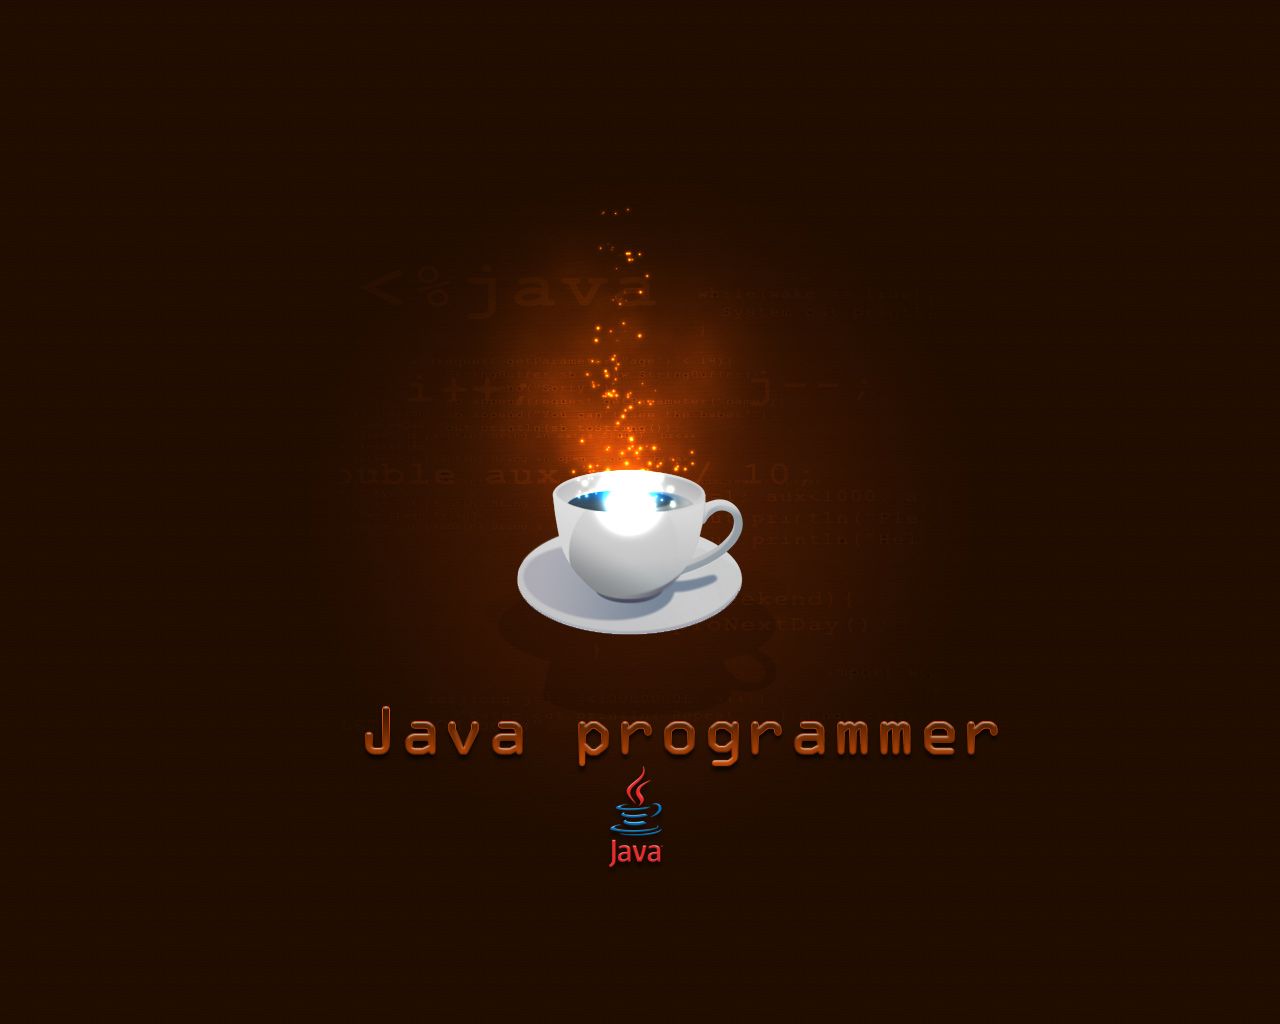 Free Download Java Programming Wallpaper 64 Images 1920x1200 For Your